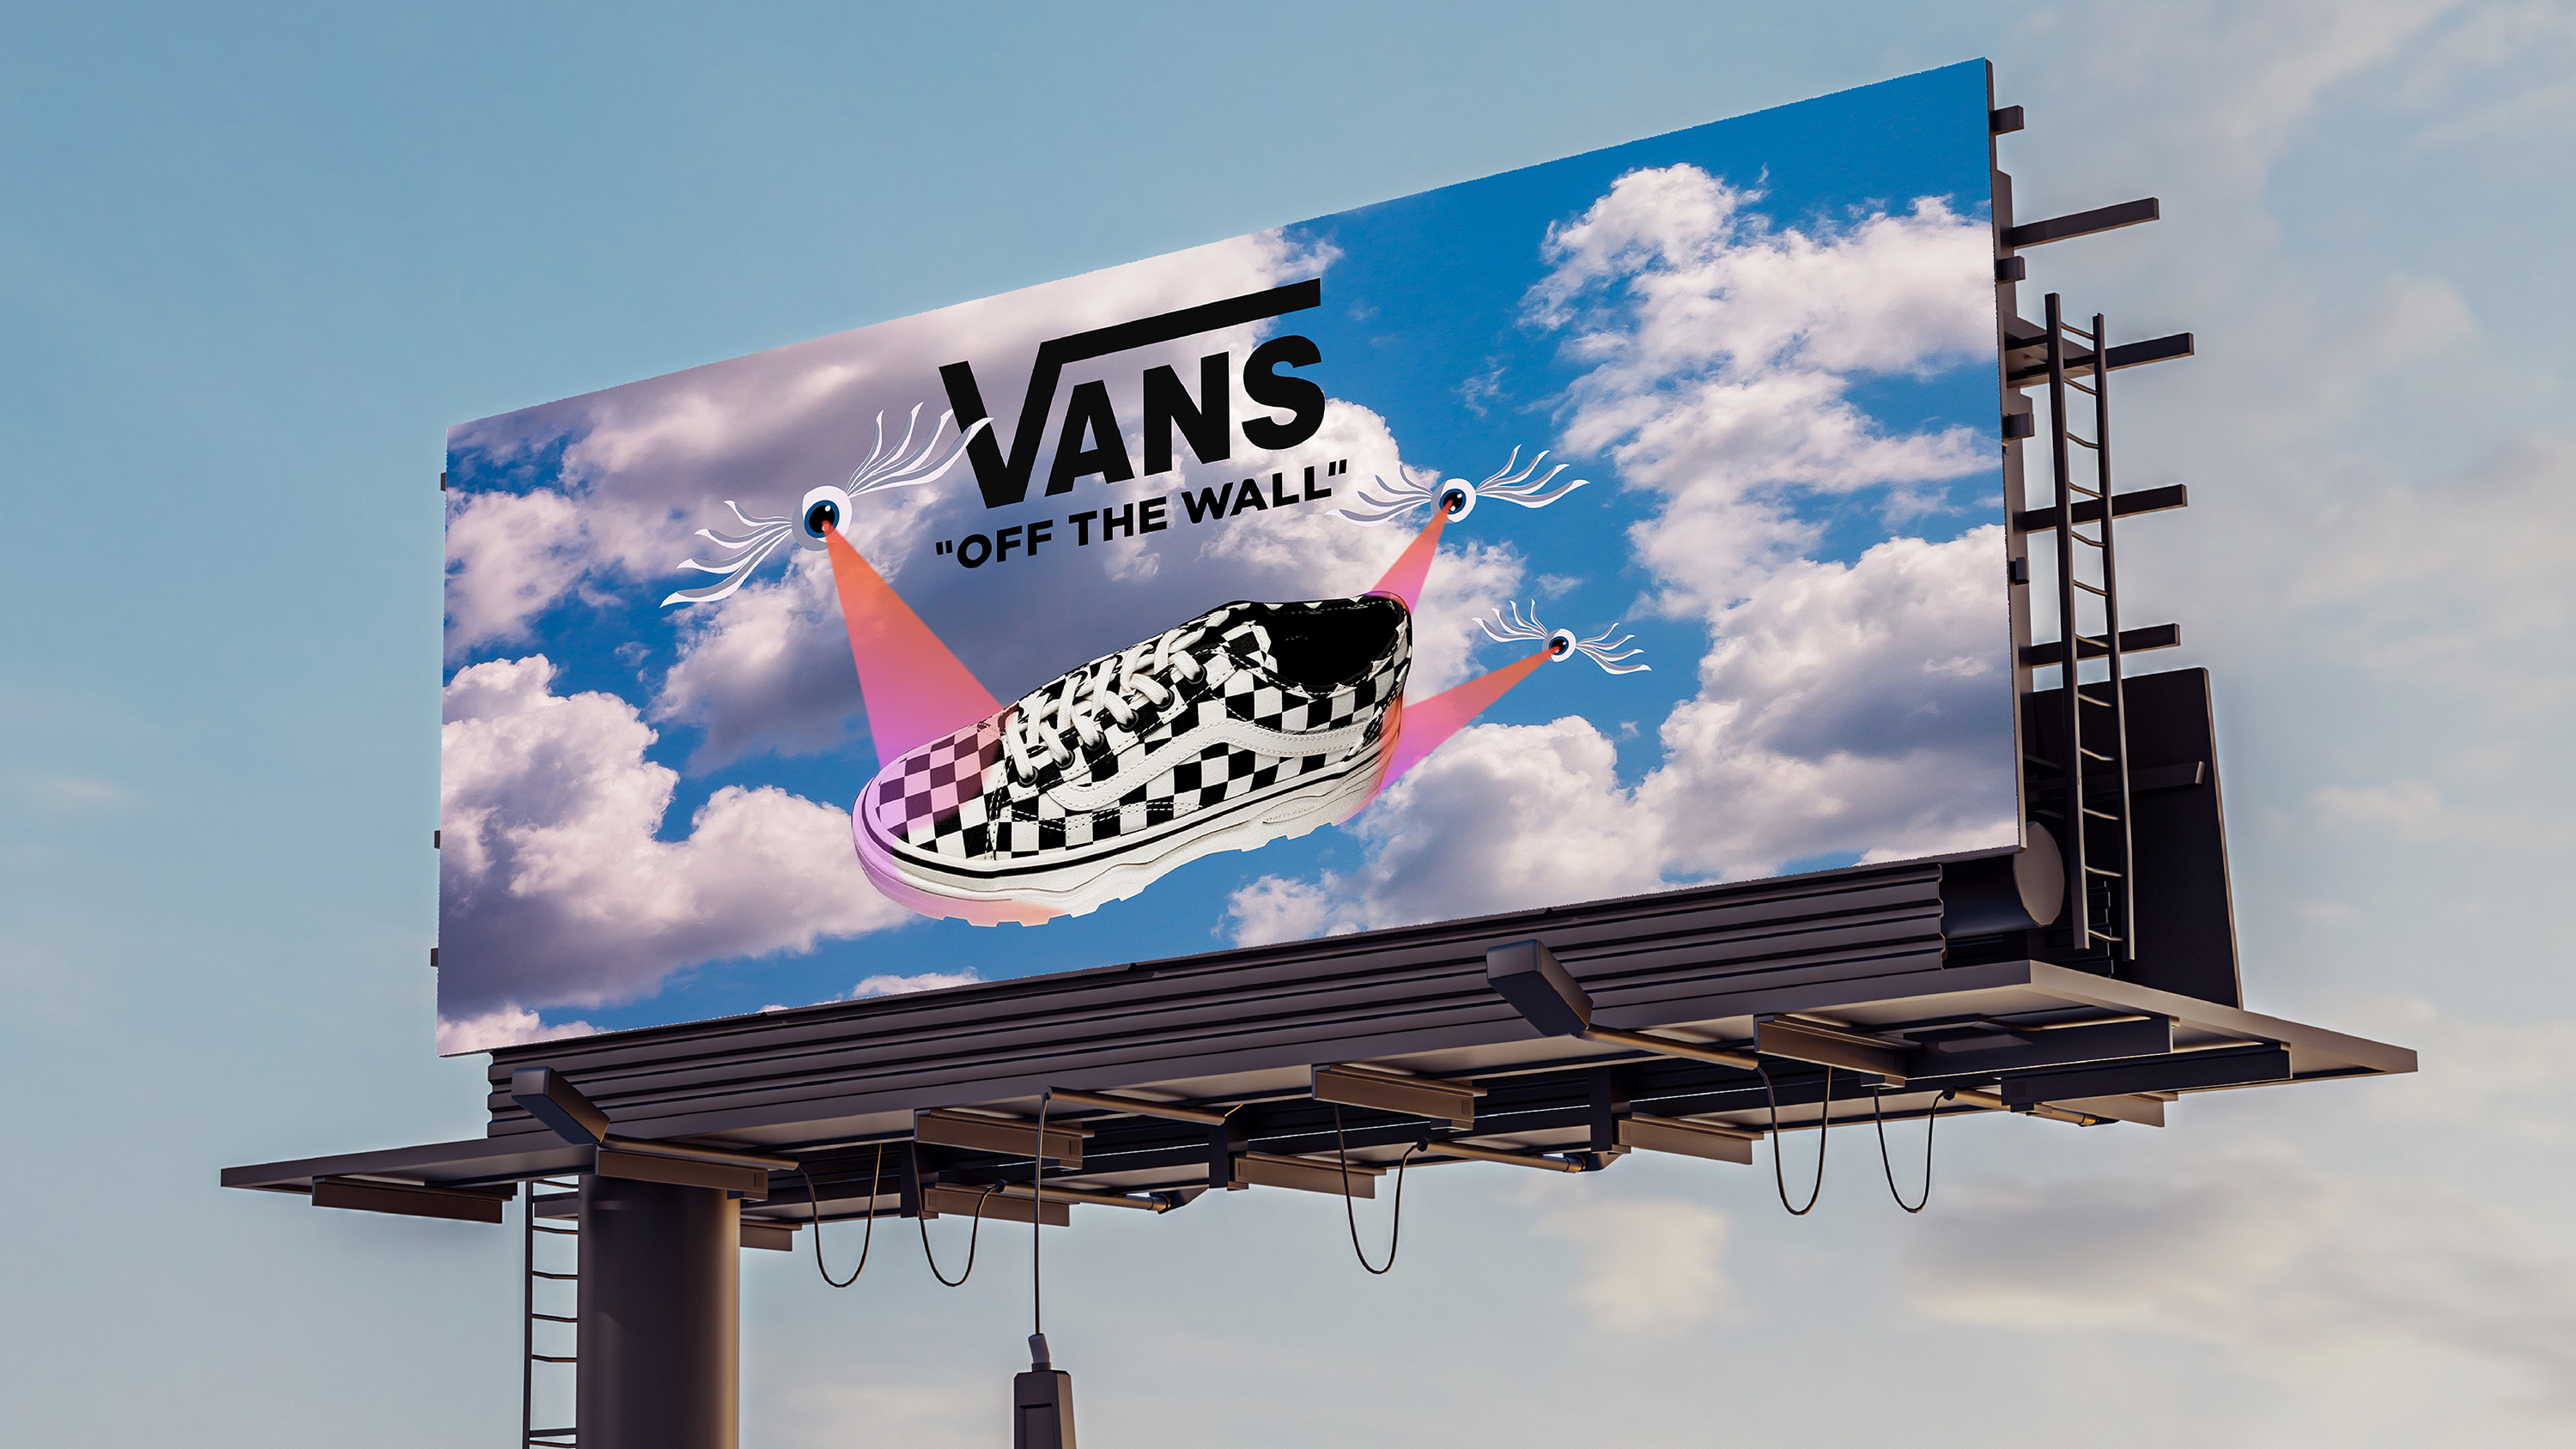 Vans Billboard / "Vans Billboard," billboard ad, 14'x 48', digital ad, 2023. The Vans billboard is a large street advertisement showing the newly released 2023 Vans.